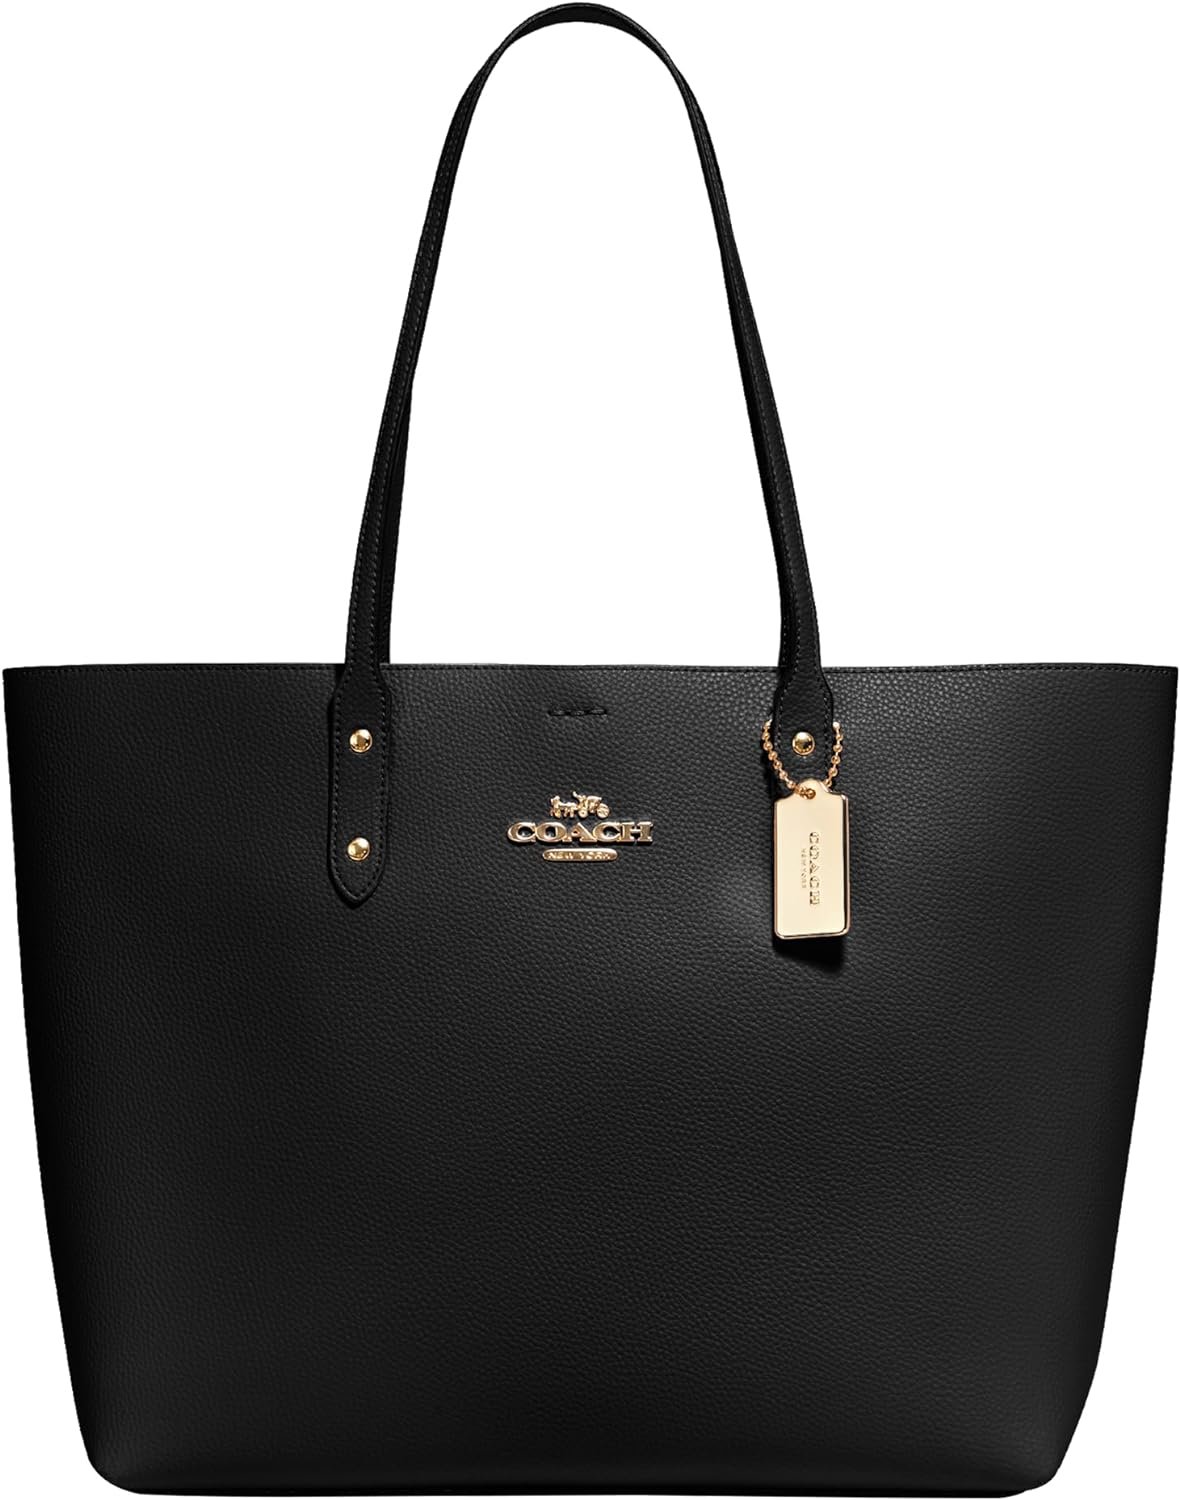 Coach Unisex Town Tote